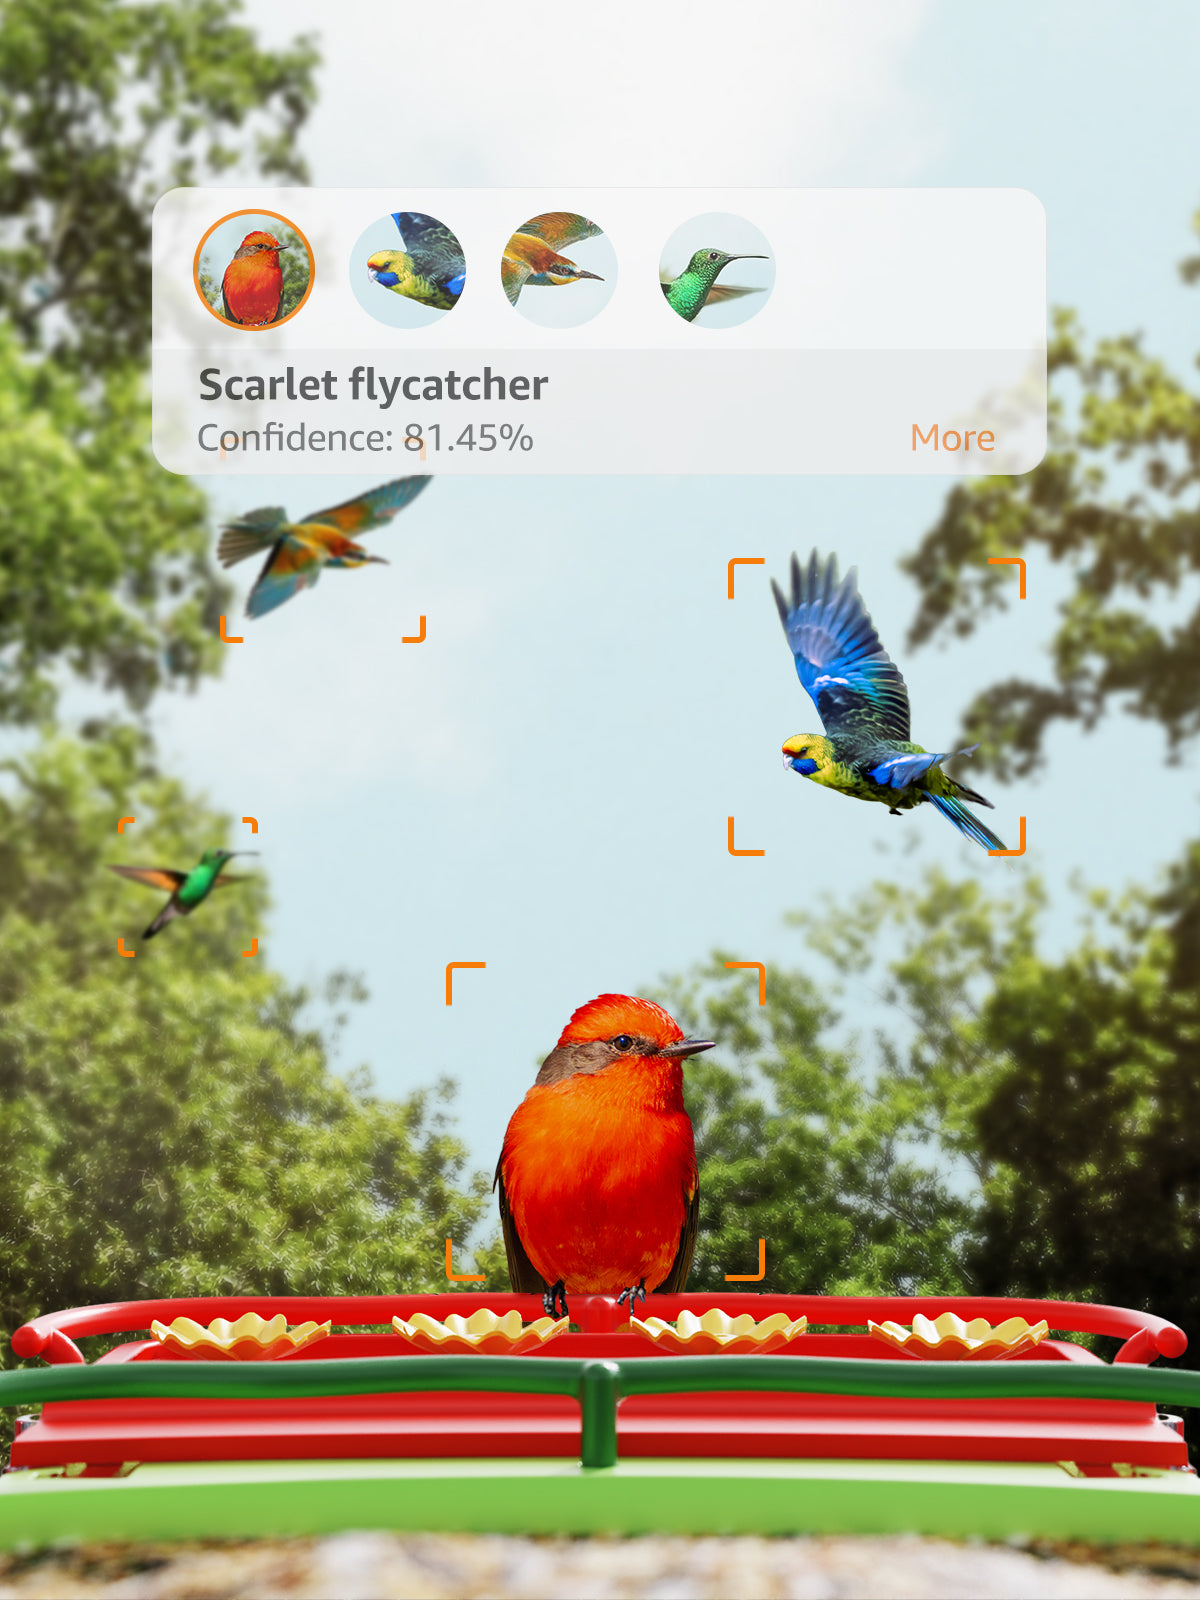 Smart bird feeder snaps bird selfies for collectible game and